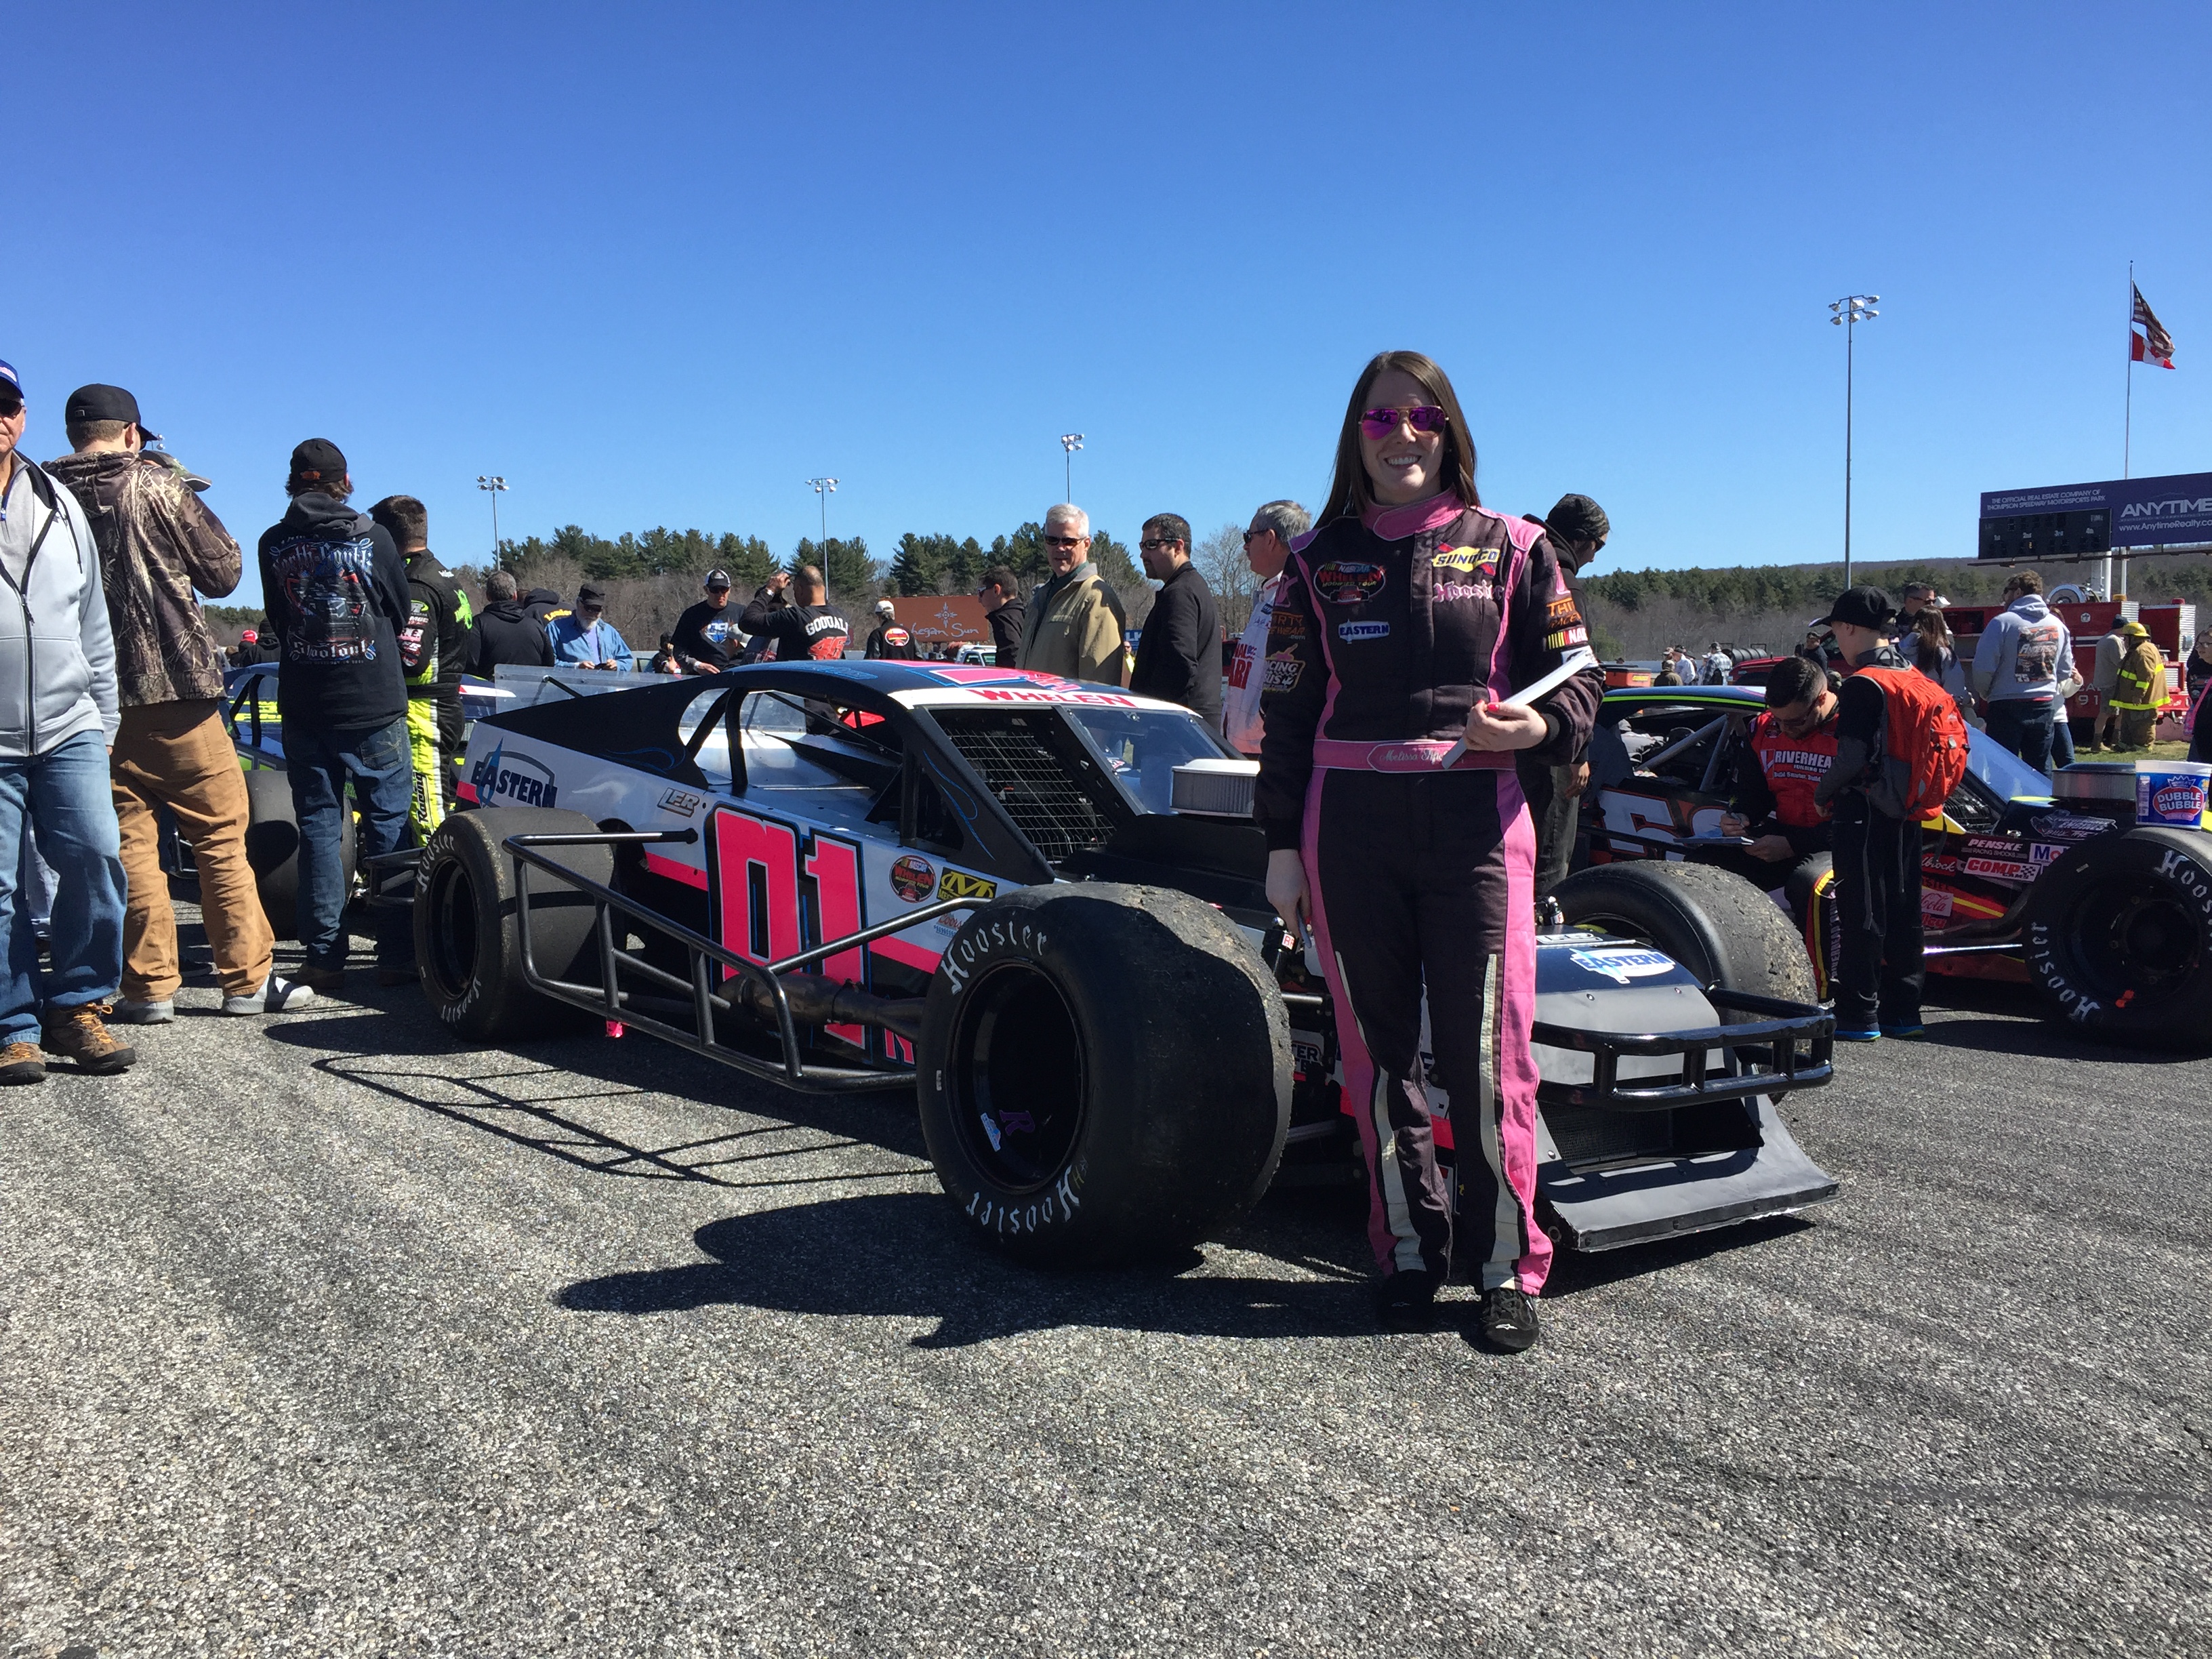 Above all, Melissa Fifield represents the everyday hero, working full-time while racing modified cars in a full-time basis. (Photo Credit: Melissa Fifield)